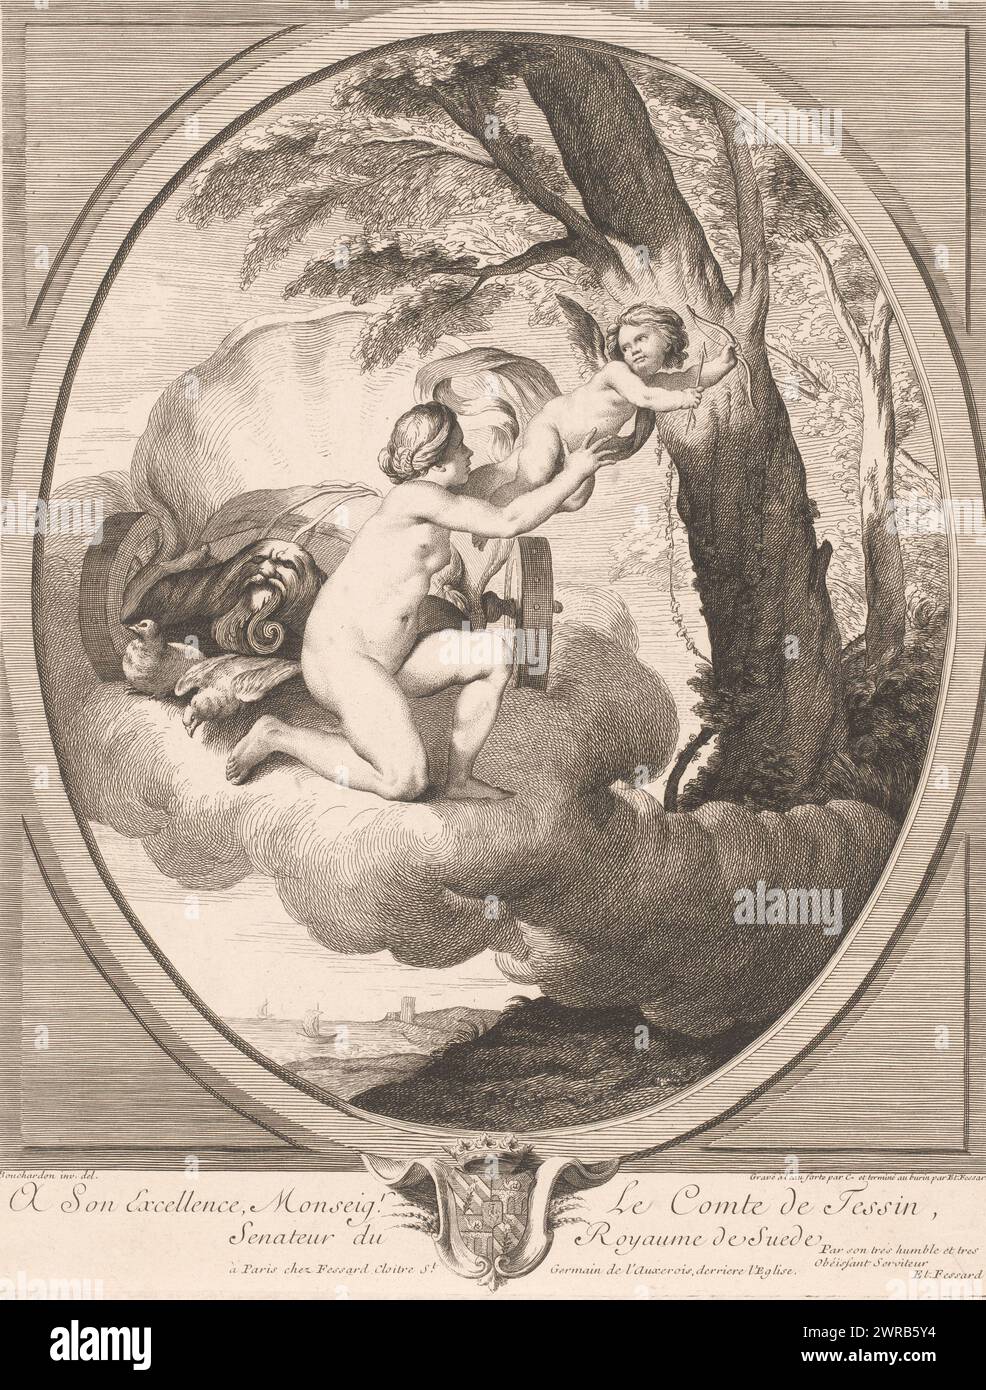 Venus protects Amor from the hunt, print maker: Etienne Fessard, print maker: Anne Claude Philippe Caylus, after drawing by: Bouchardon, print maker: France, print maker: France, publisher: Paris, 1724 - 1777, paper, etching, engraving, height 334 mm × width 265 mm, print Stock Photo